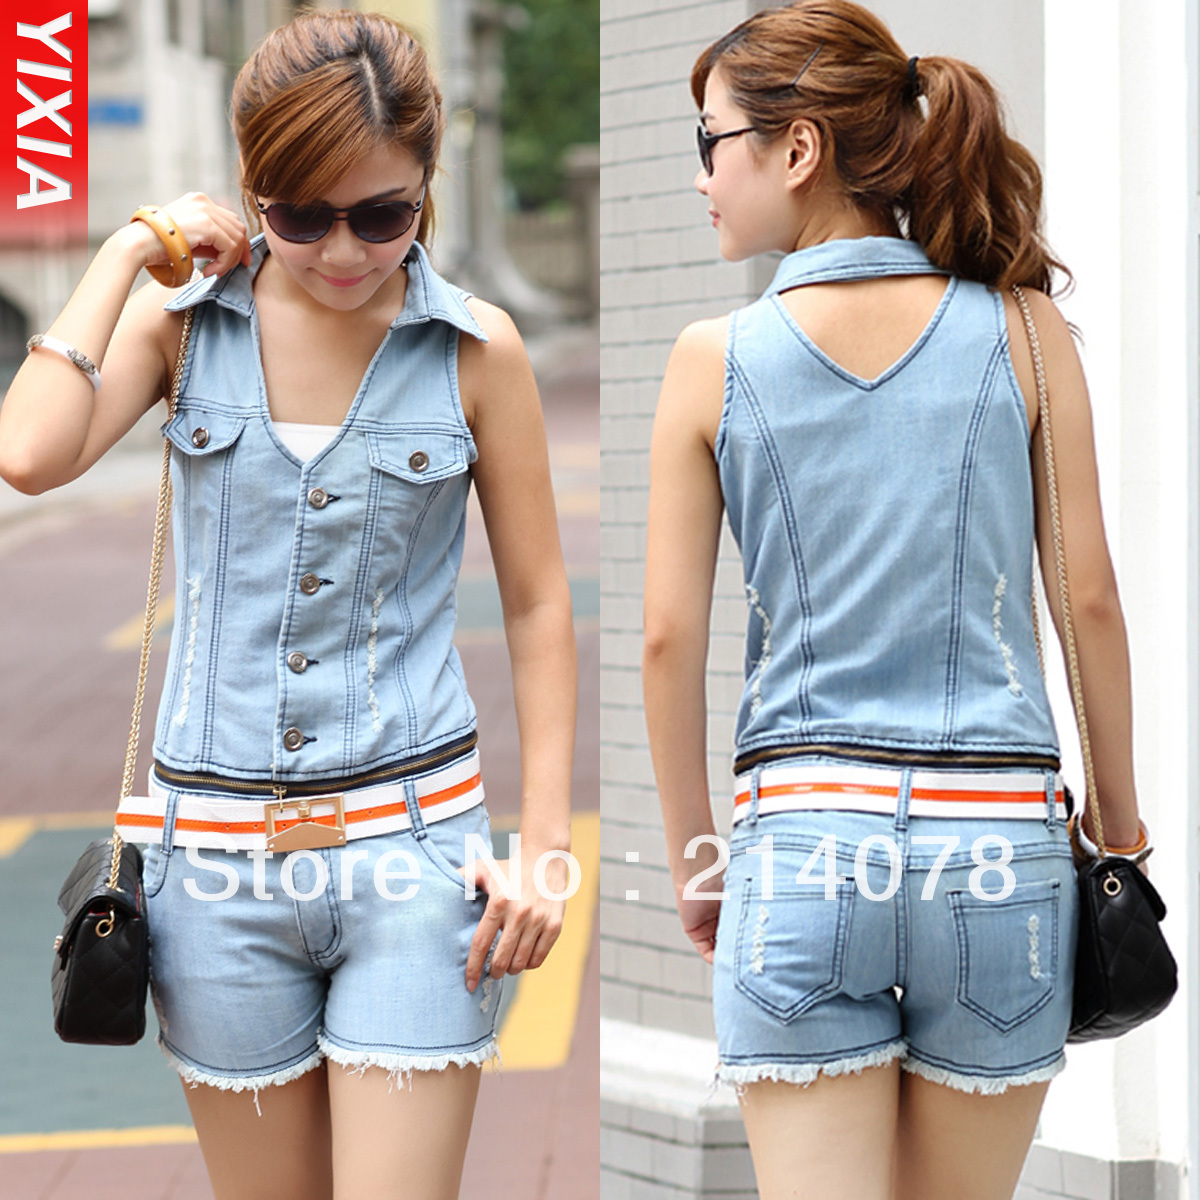 Free shipping women denim jumpsuit set with free belt  one tank blouse + one short / rompers